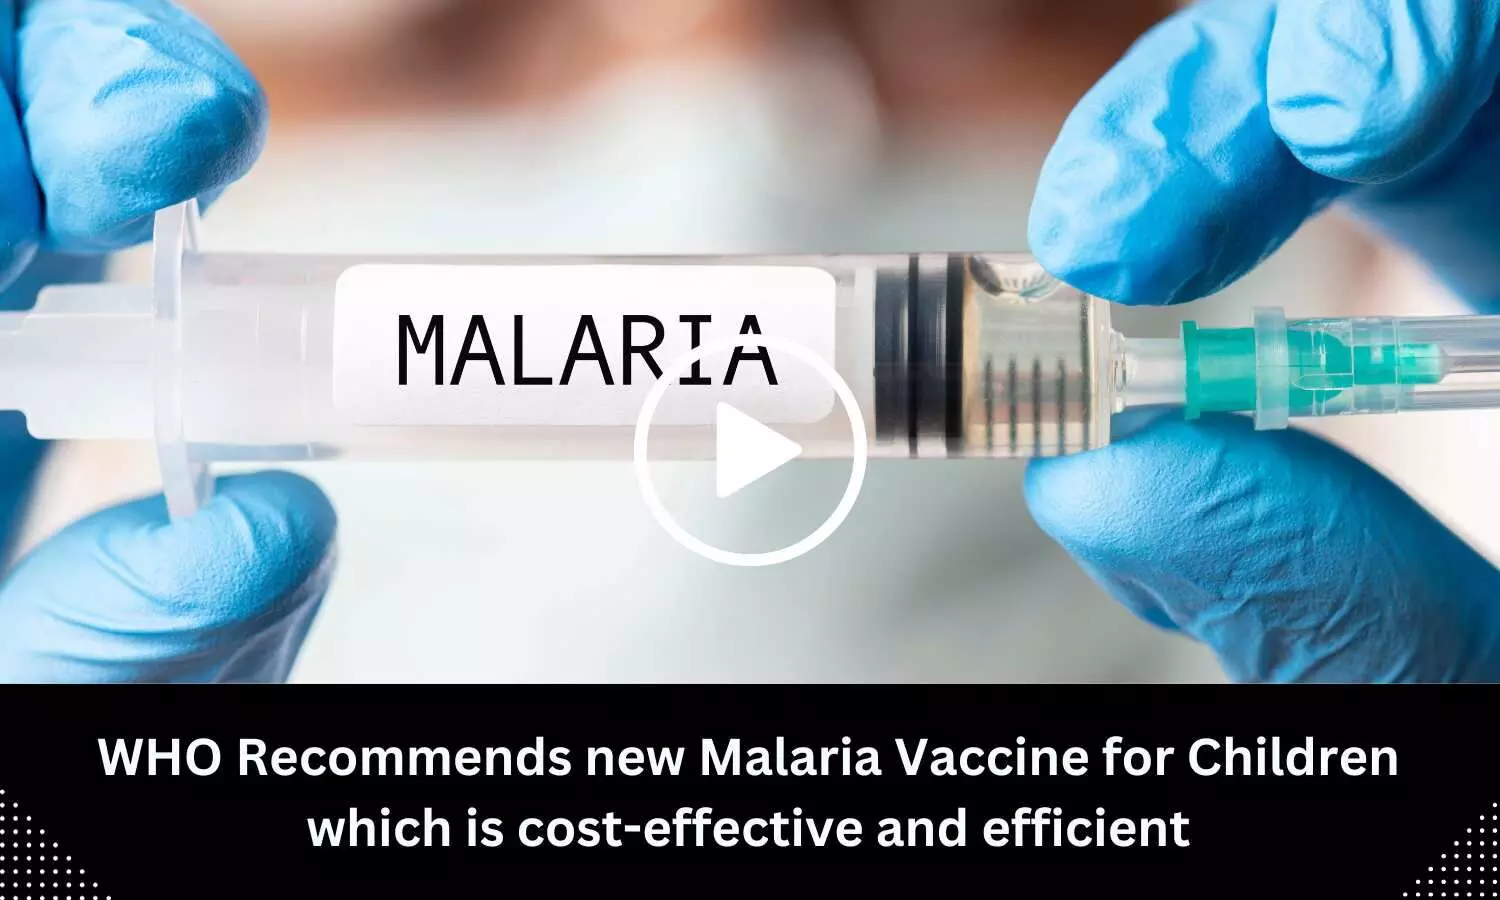 WHO Recommends new Malaria Vaccine for children which is cost-effective and efficient